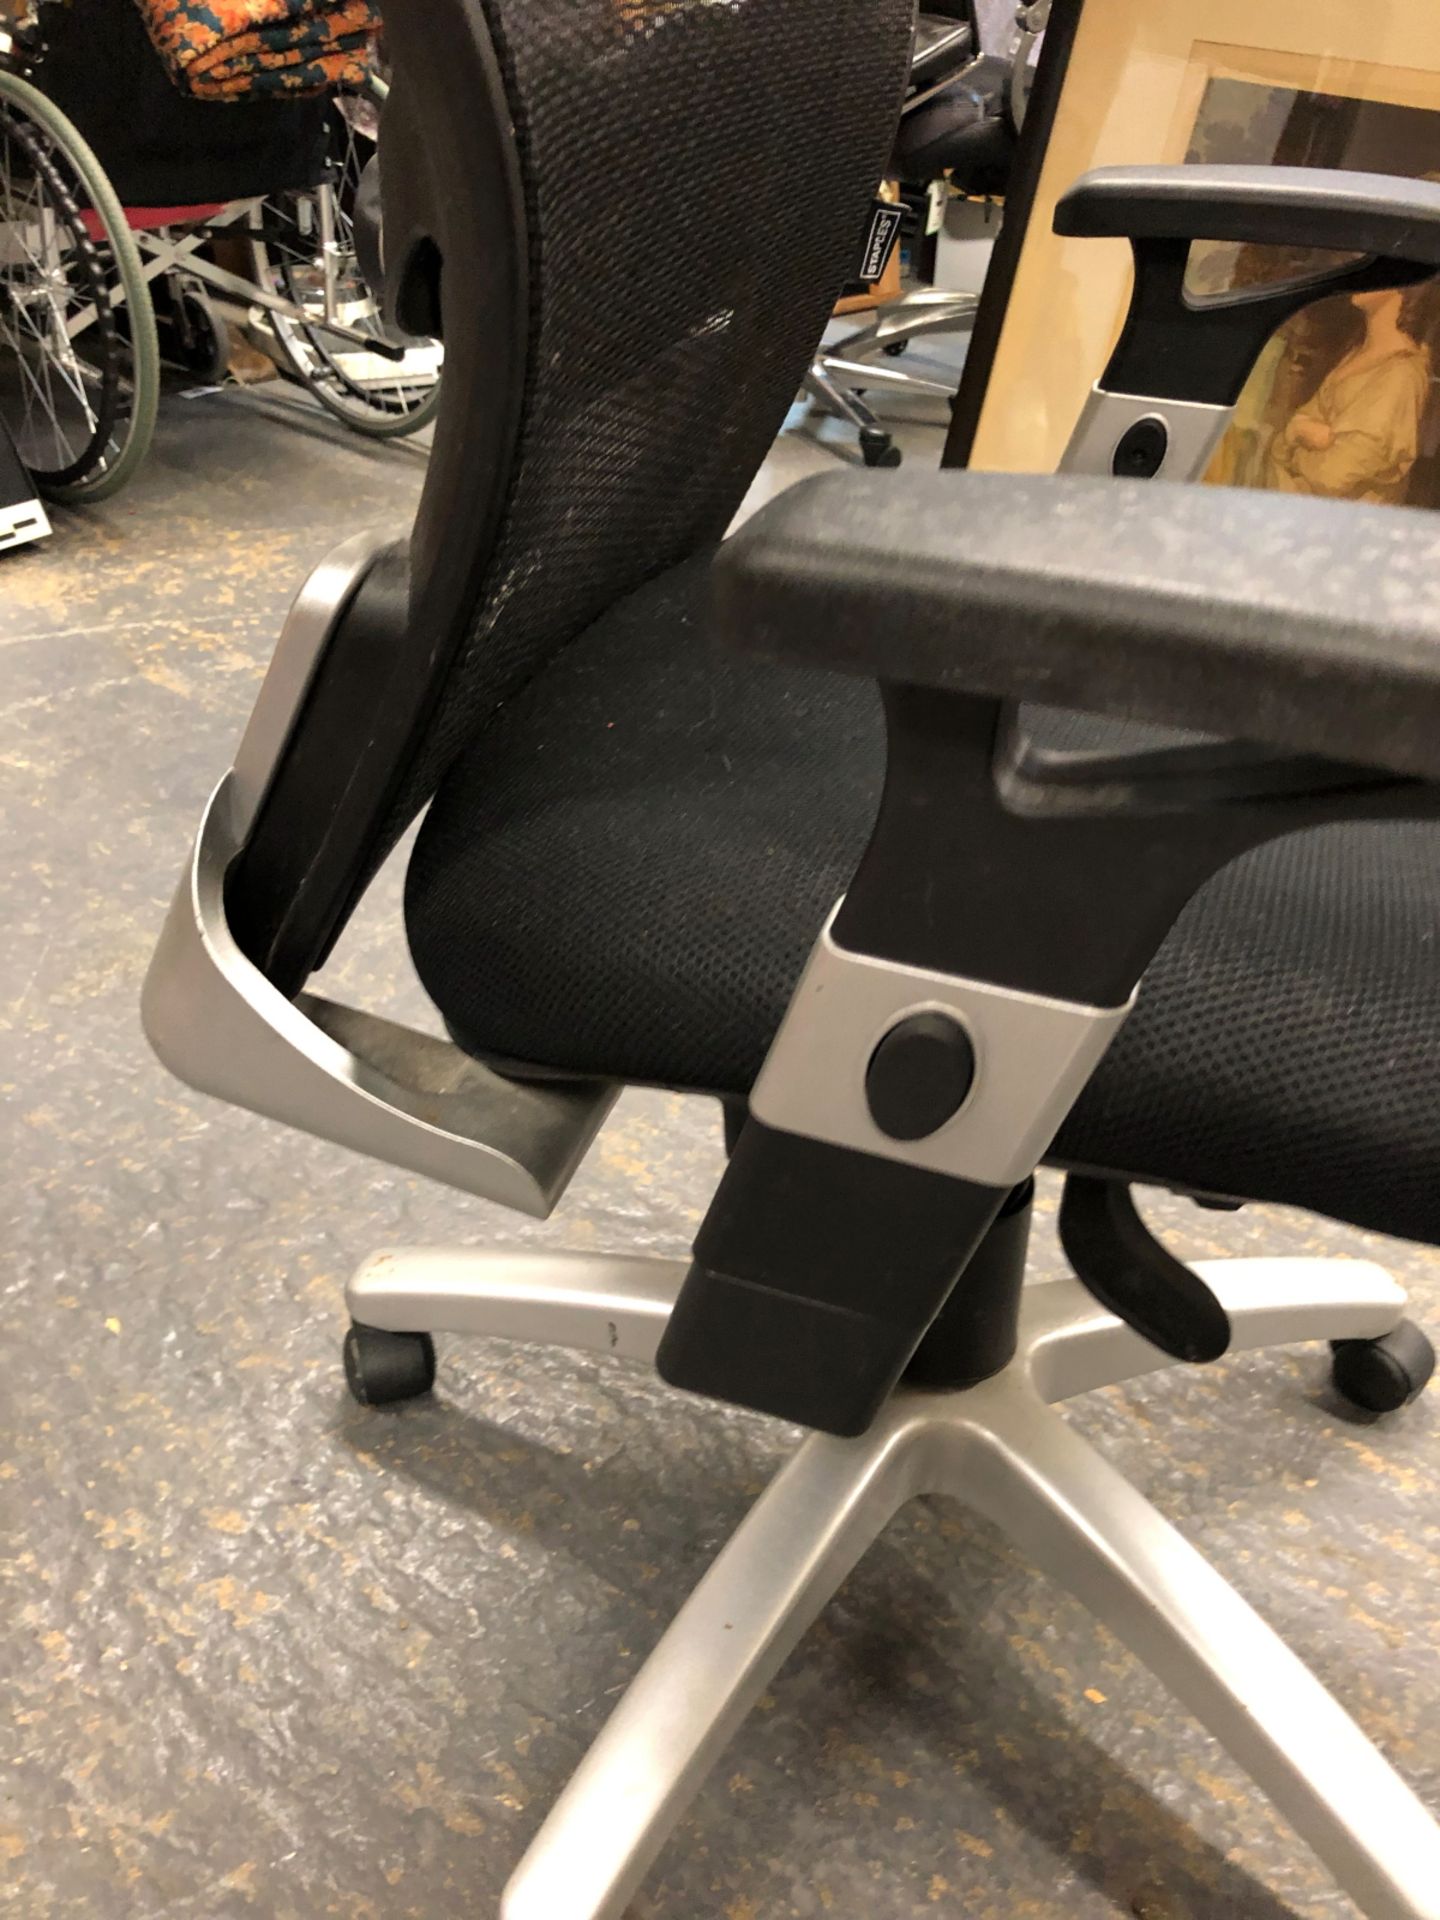 A STAPLES ERGONOMIC OFFICE CHAIR. - Image 6 of 8